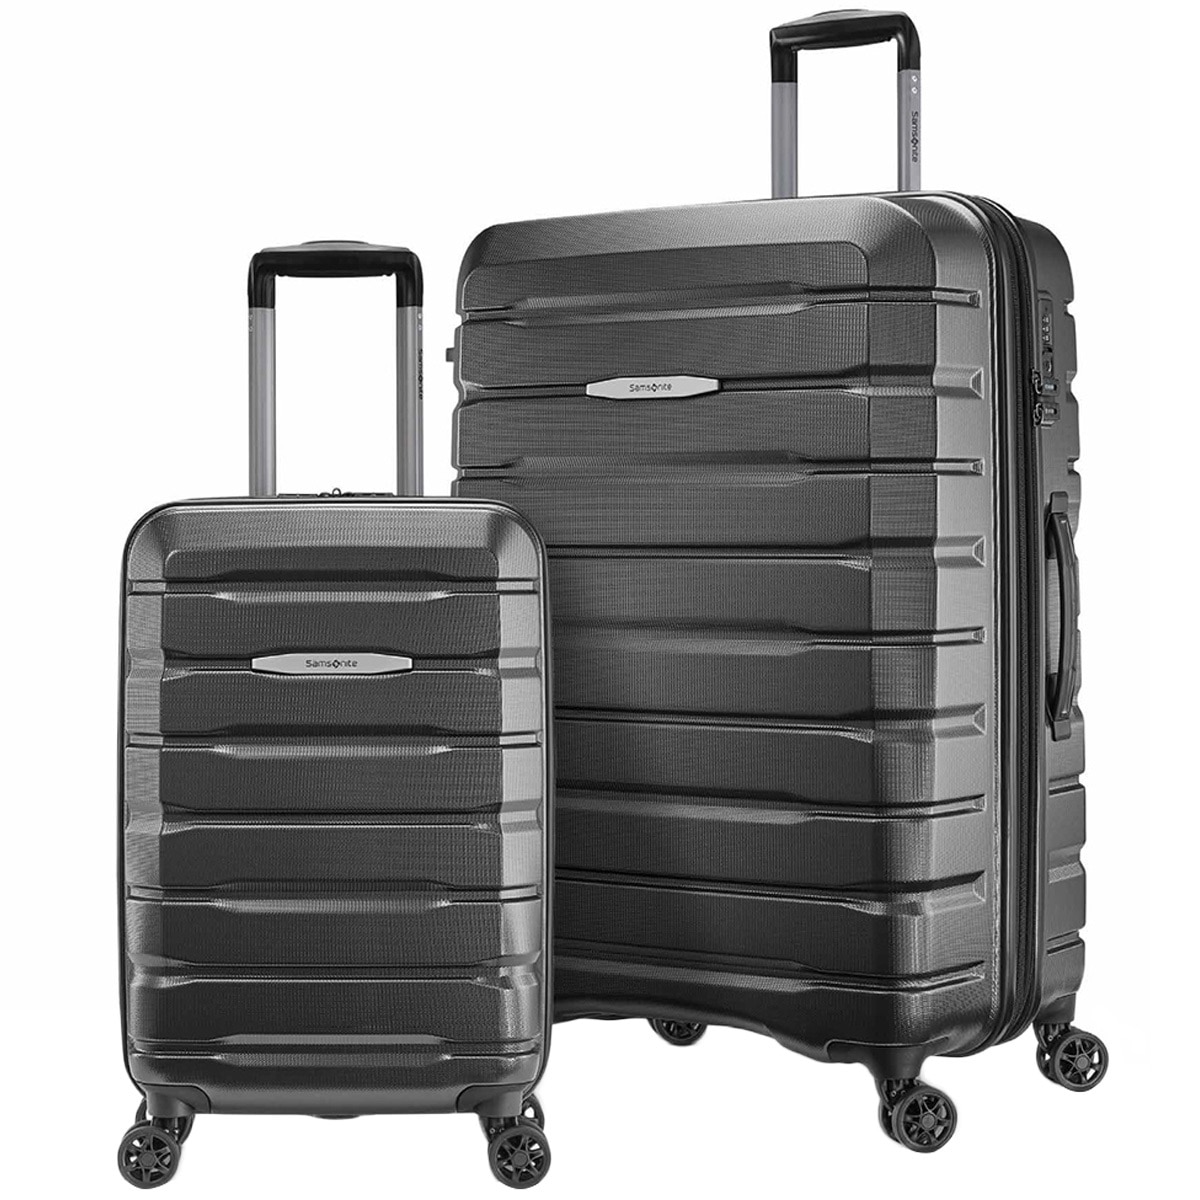 Samsonite Tech Two Hardside Luggage Large & Carry On 2pc Grey | Co